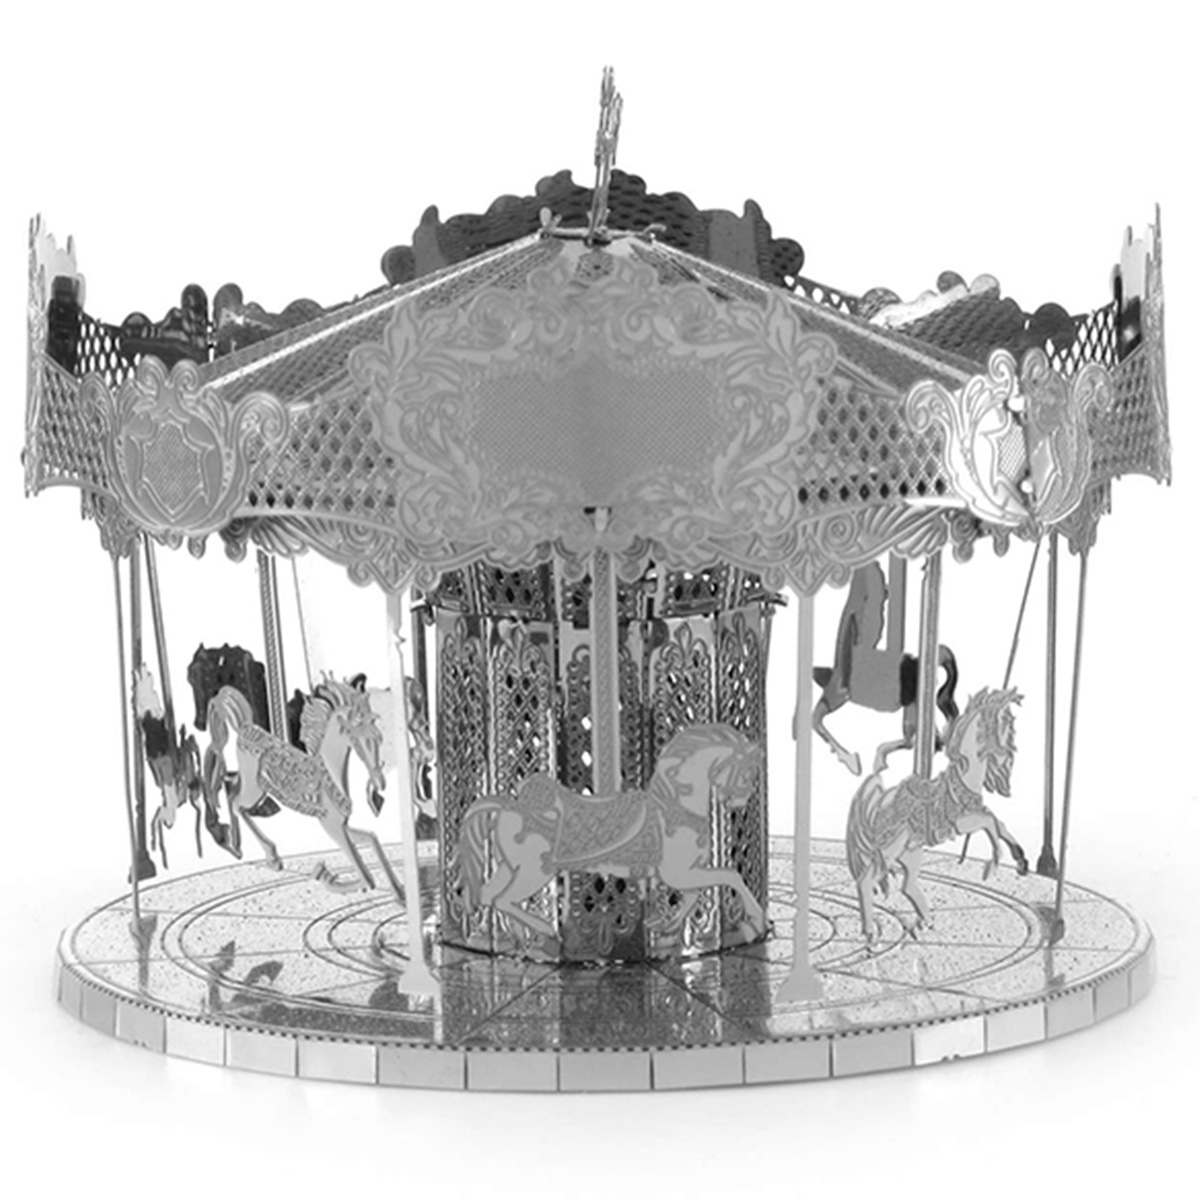 Fascinations Metal Earth Merry Go Round Laser Cut 3d Model Carousel MMS089 for sale online 